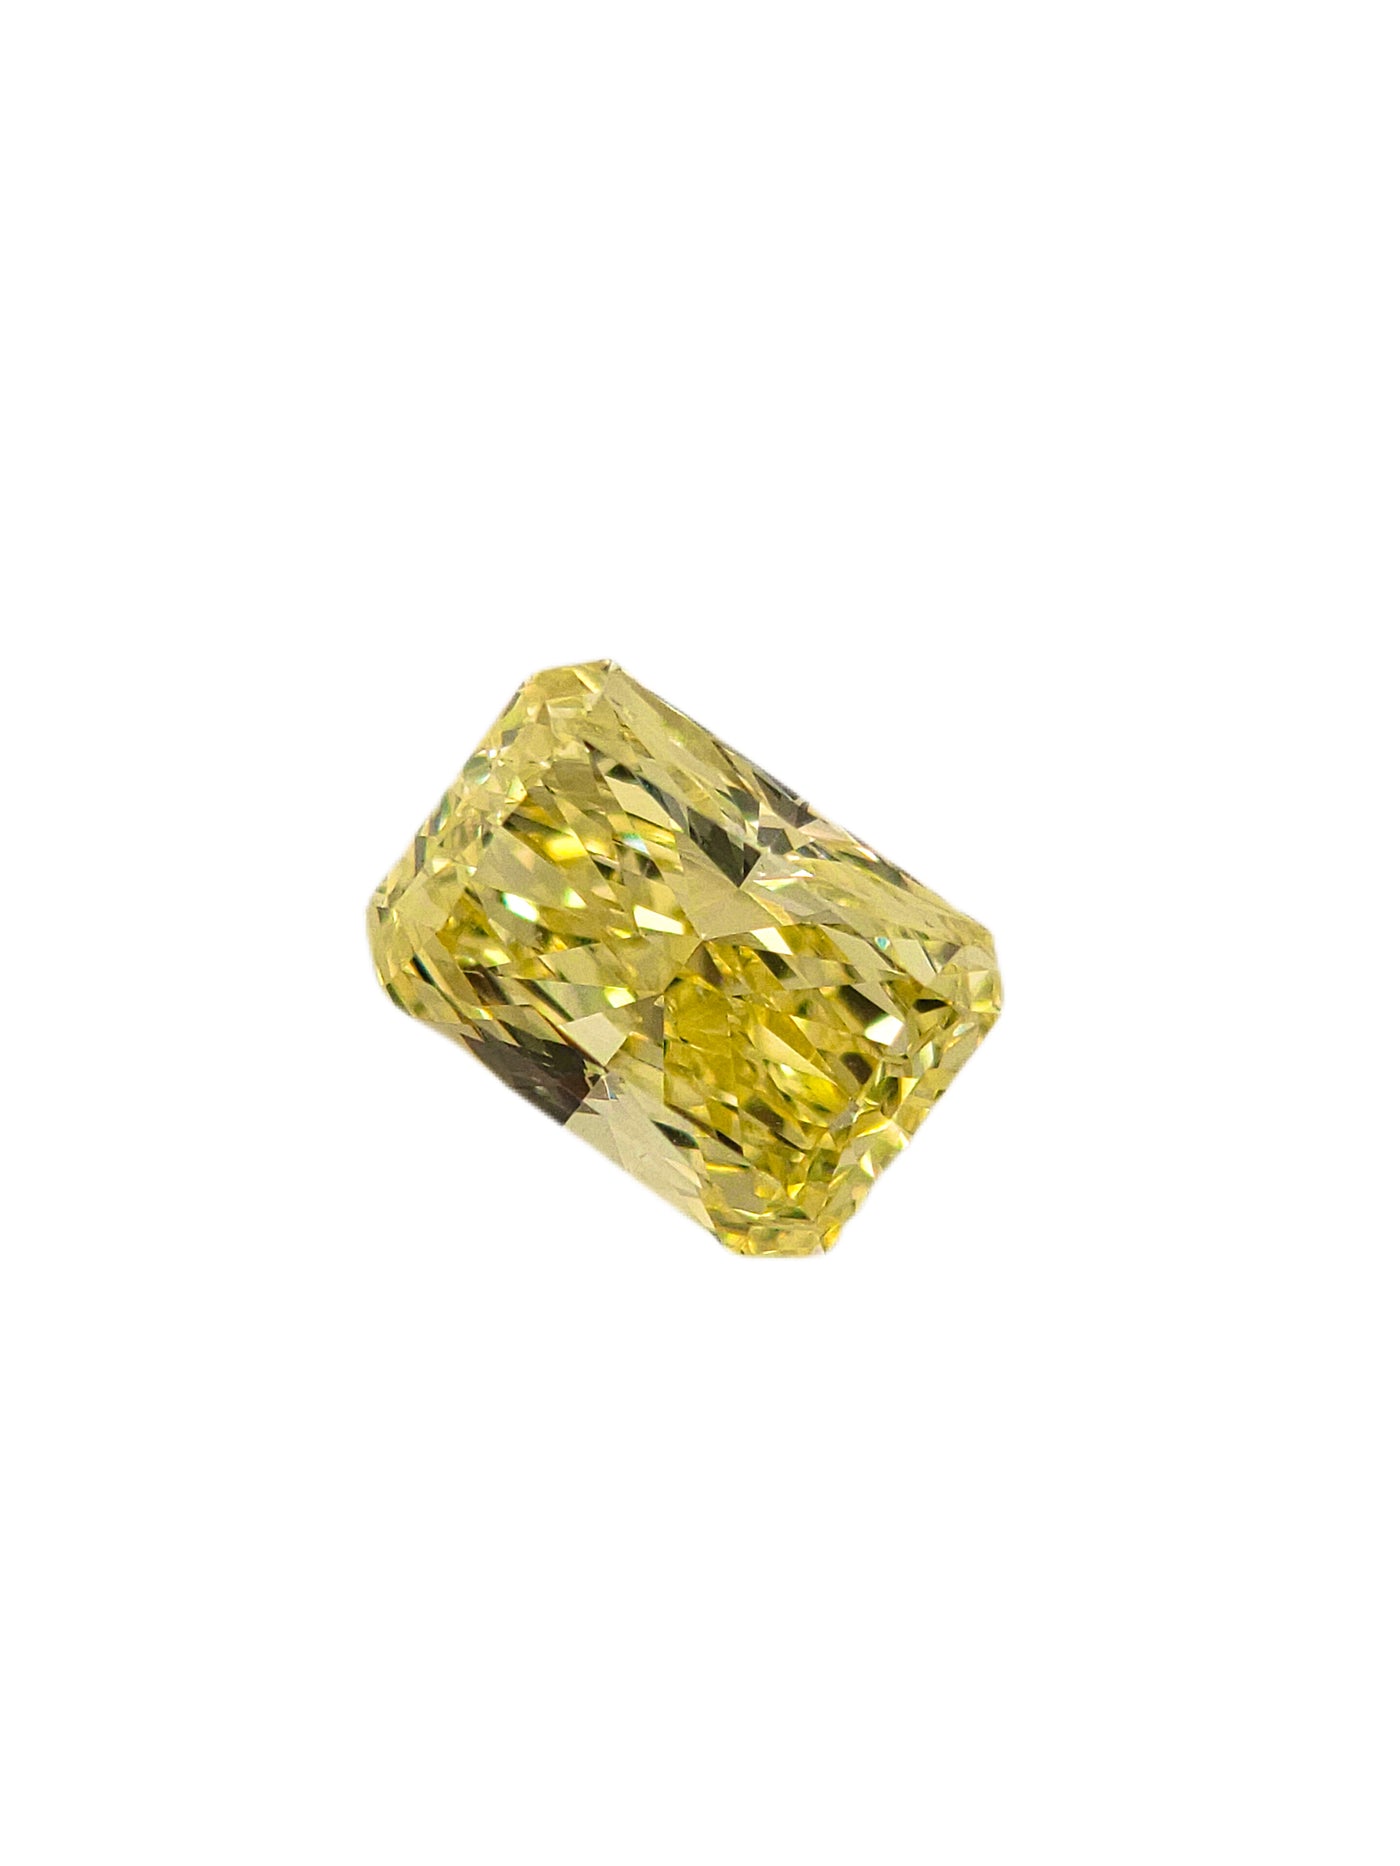 2.03ct Fancy Yellow Long Radiant SI1 GIA